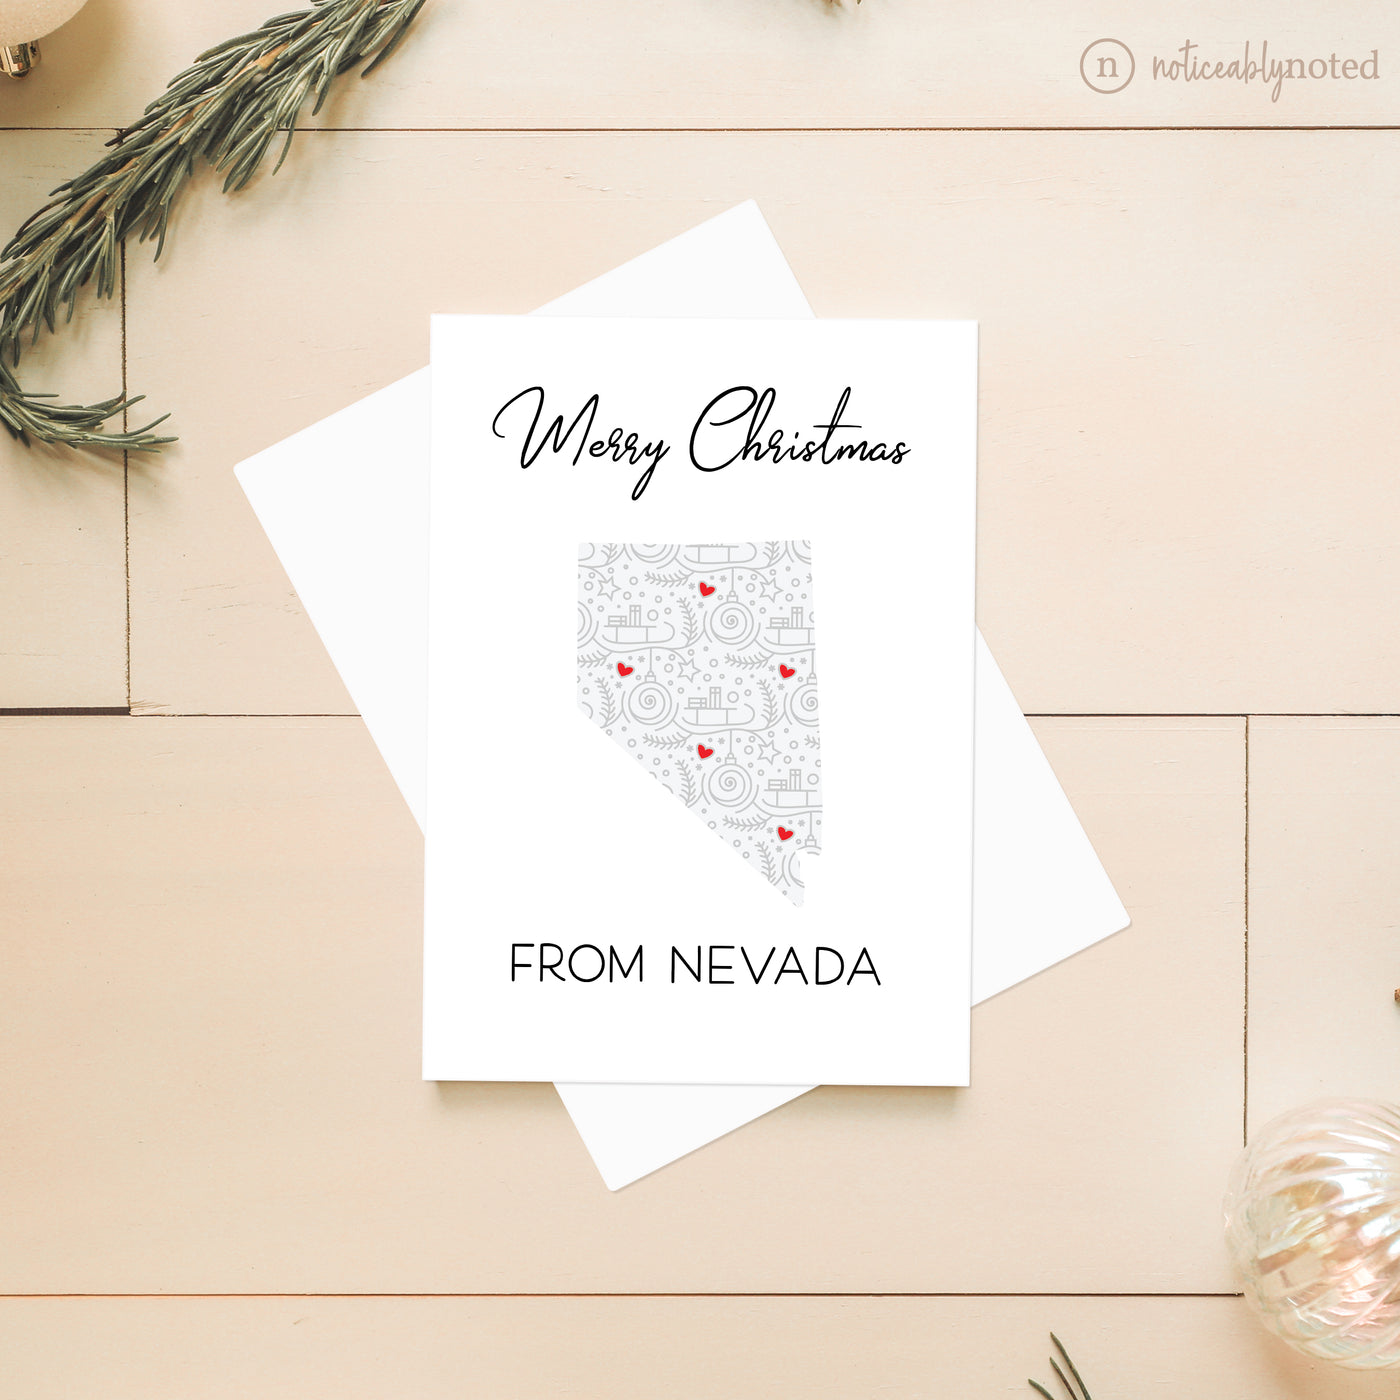 Nevada Christmas Cards | Noticeably Noted